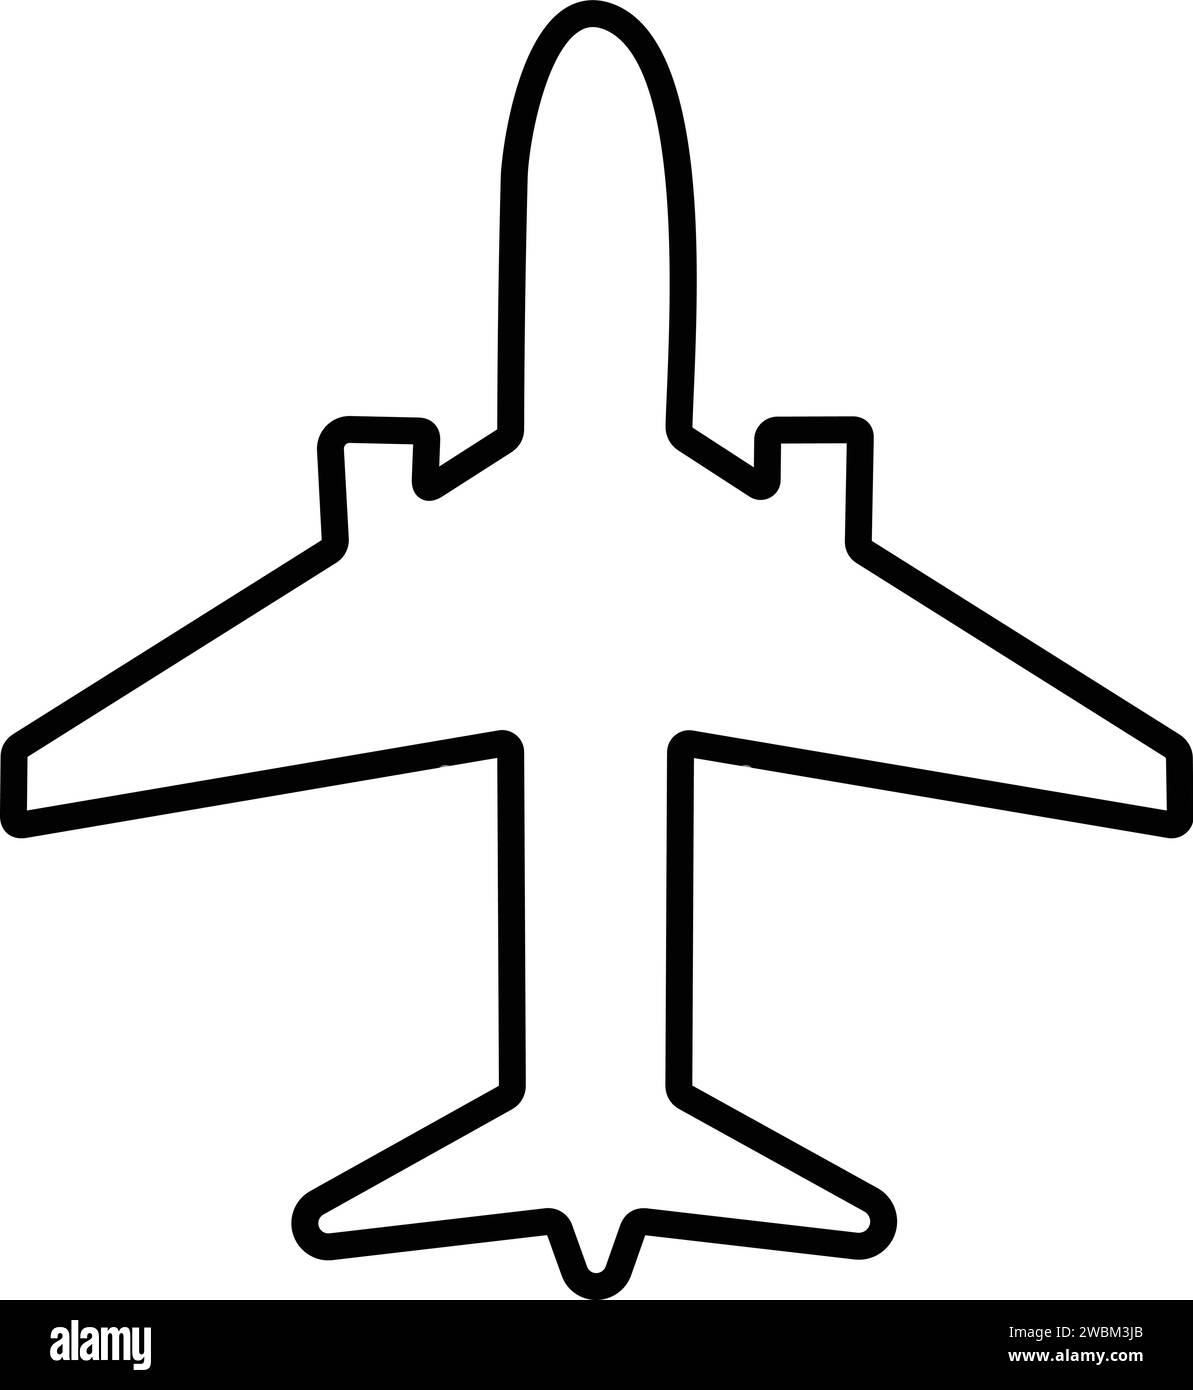 Airplane icons. Aircrafts line style. jet plane. flight travel symbol. Stock Vector